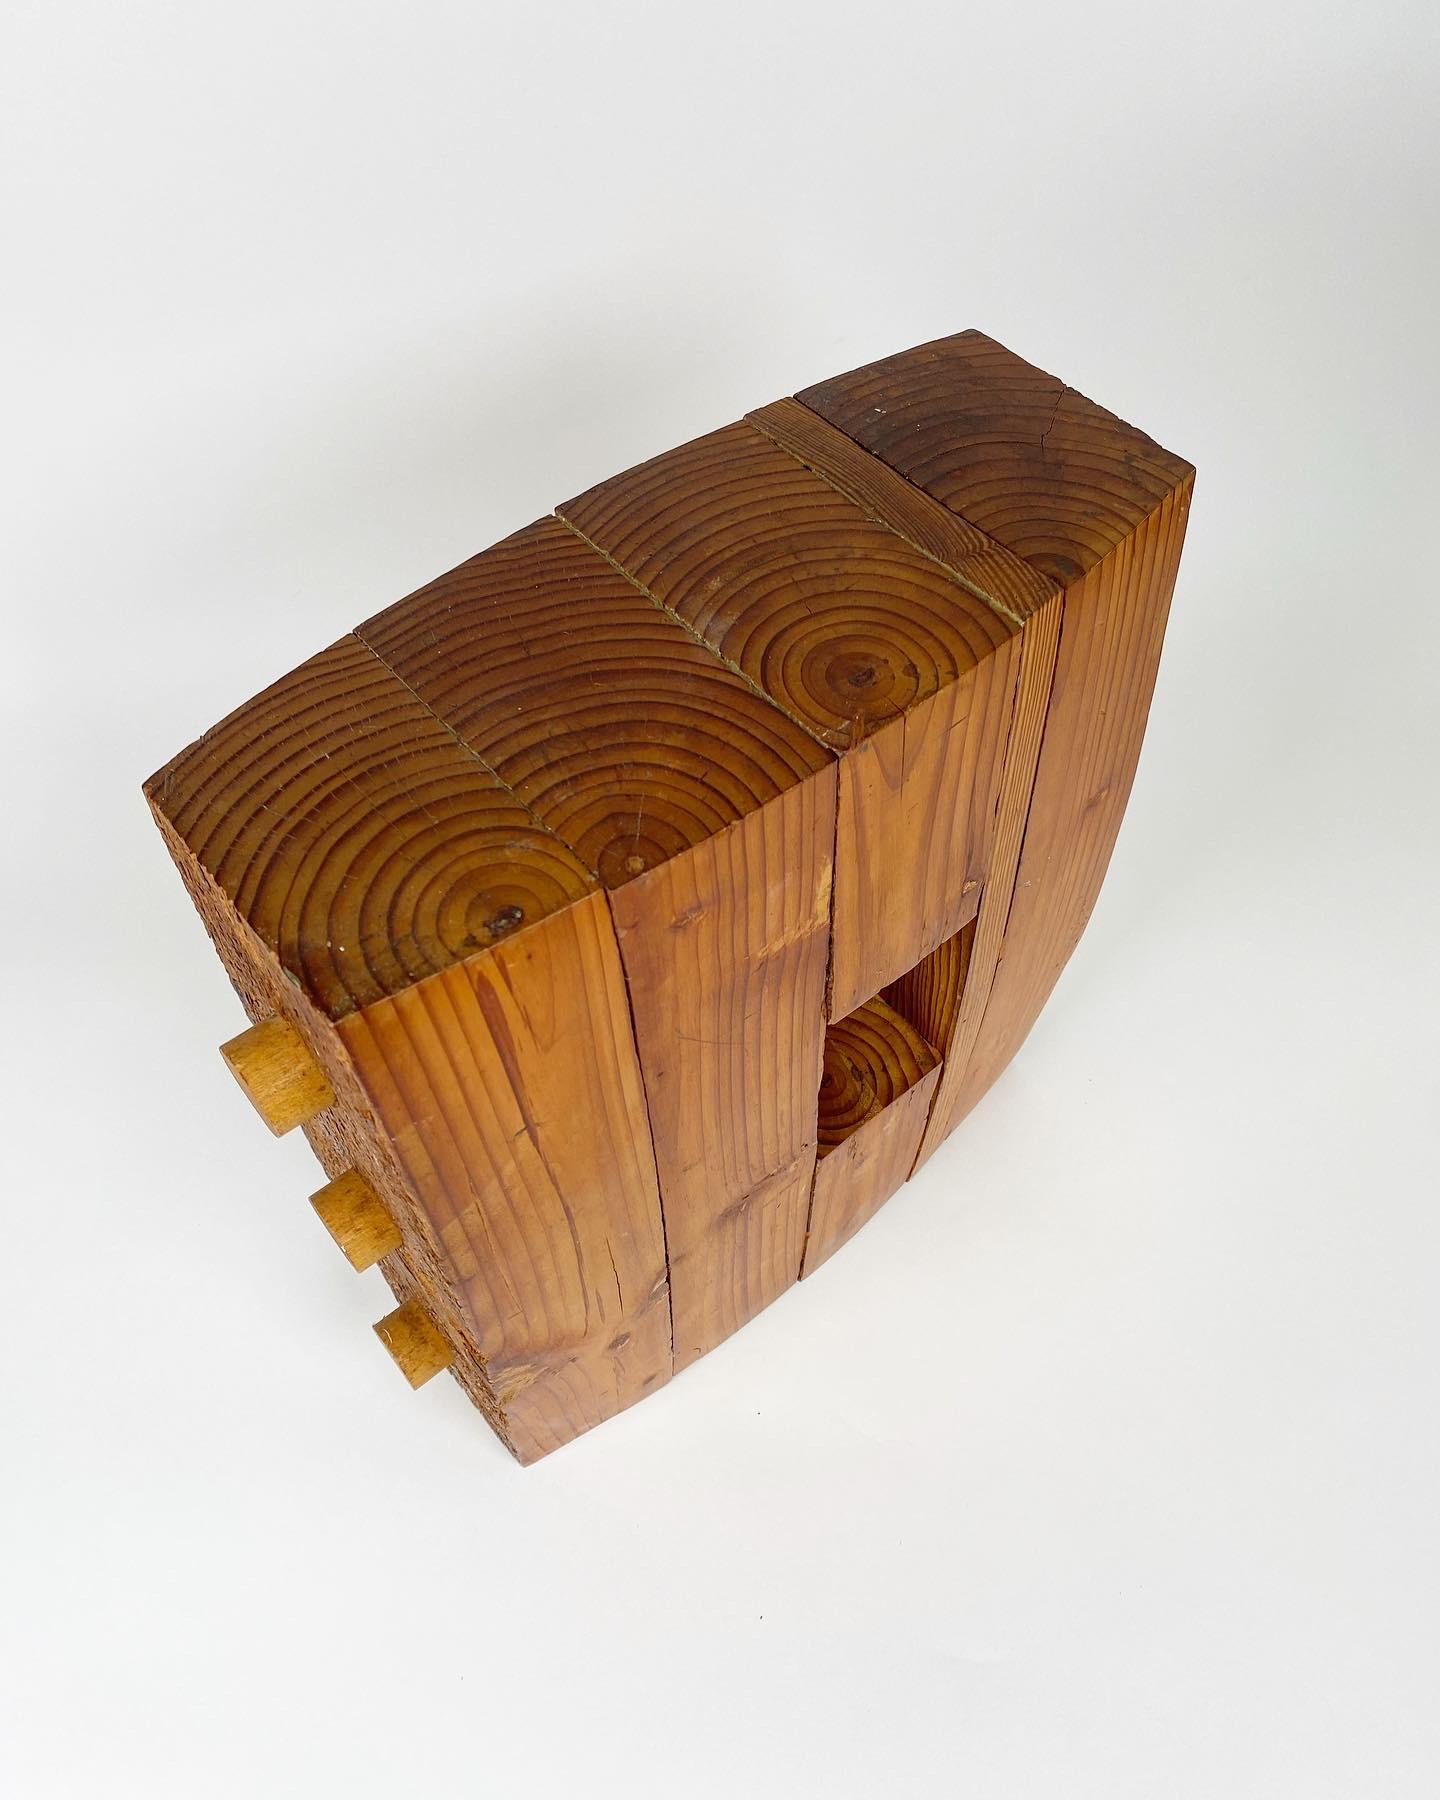 American Organic Modern Wooden Abstract Sculpture For Sale